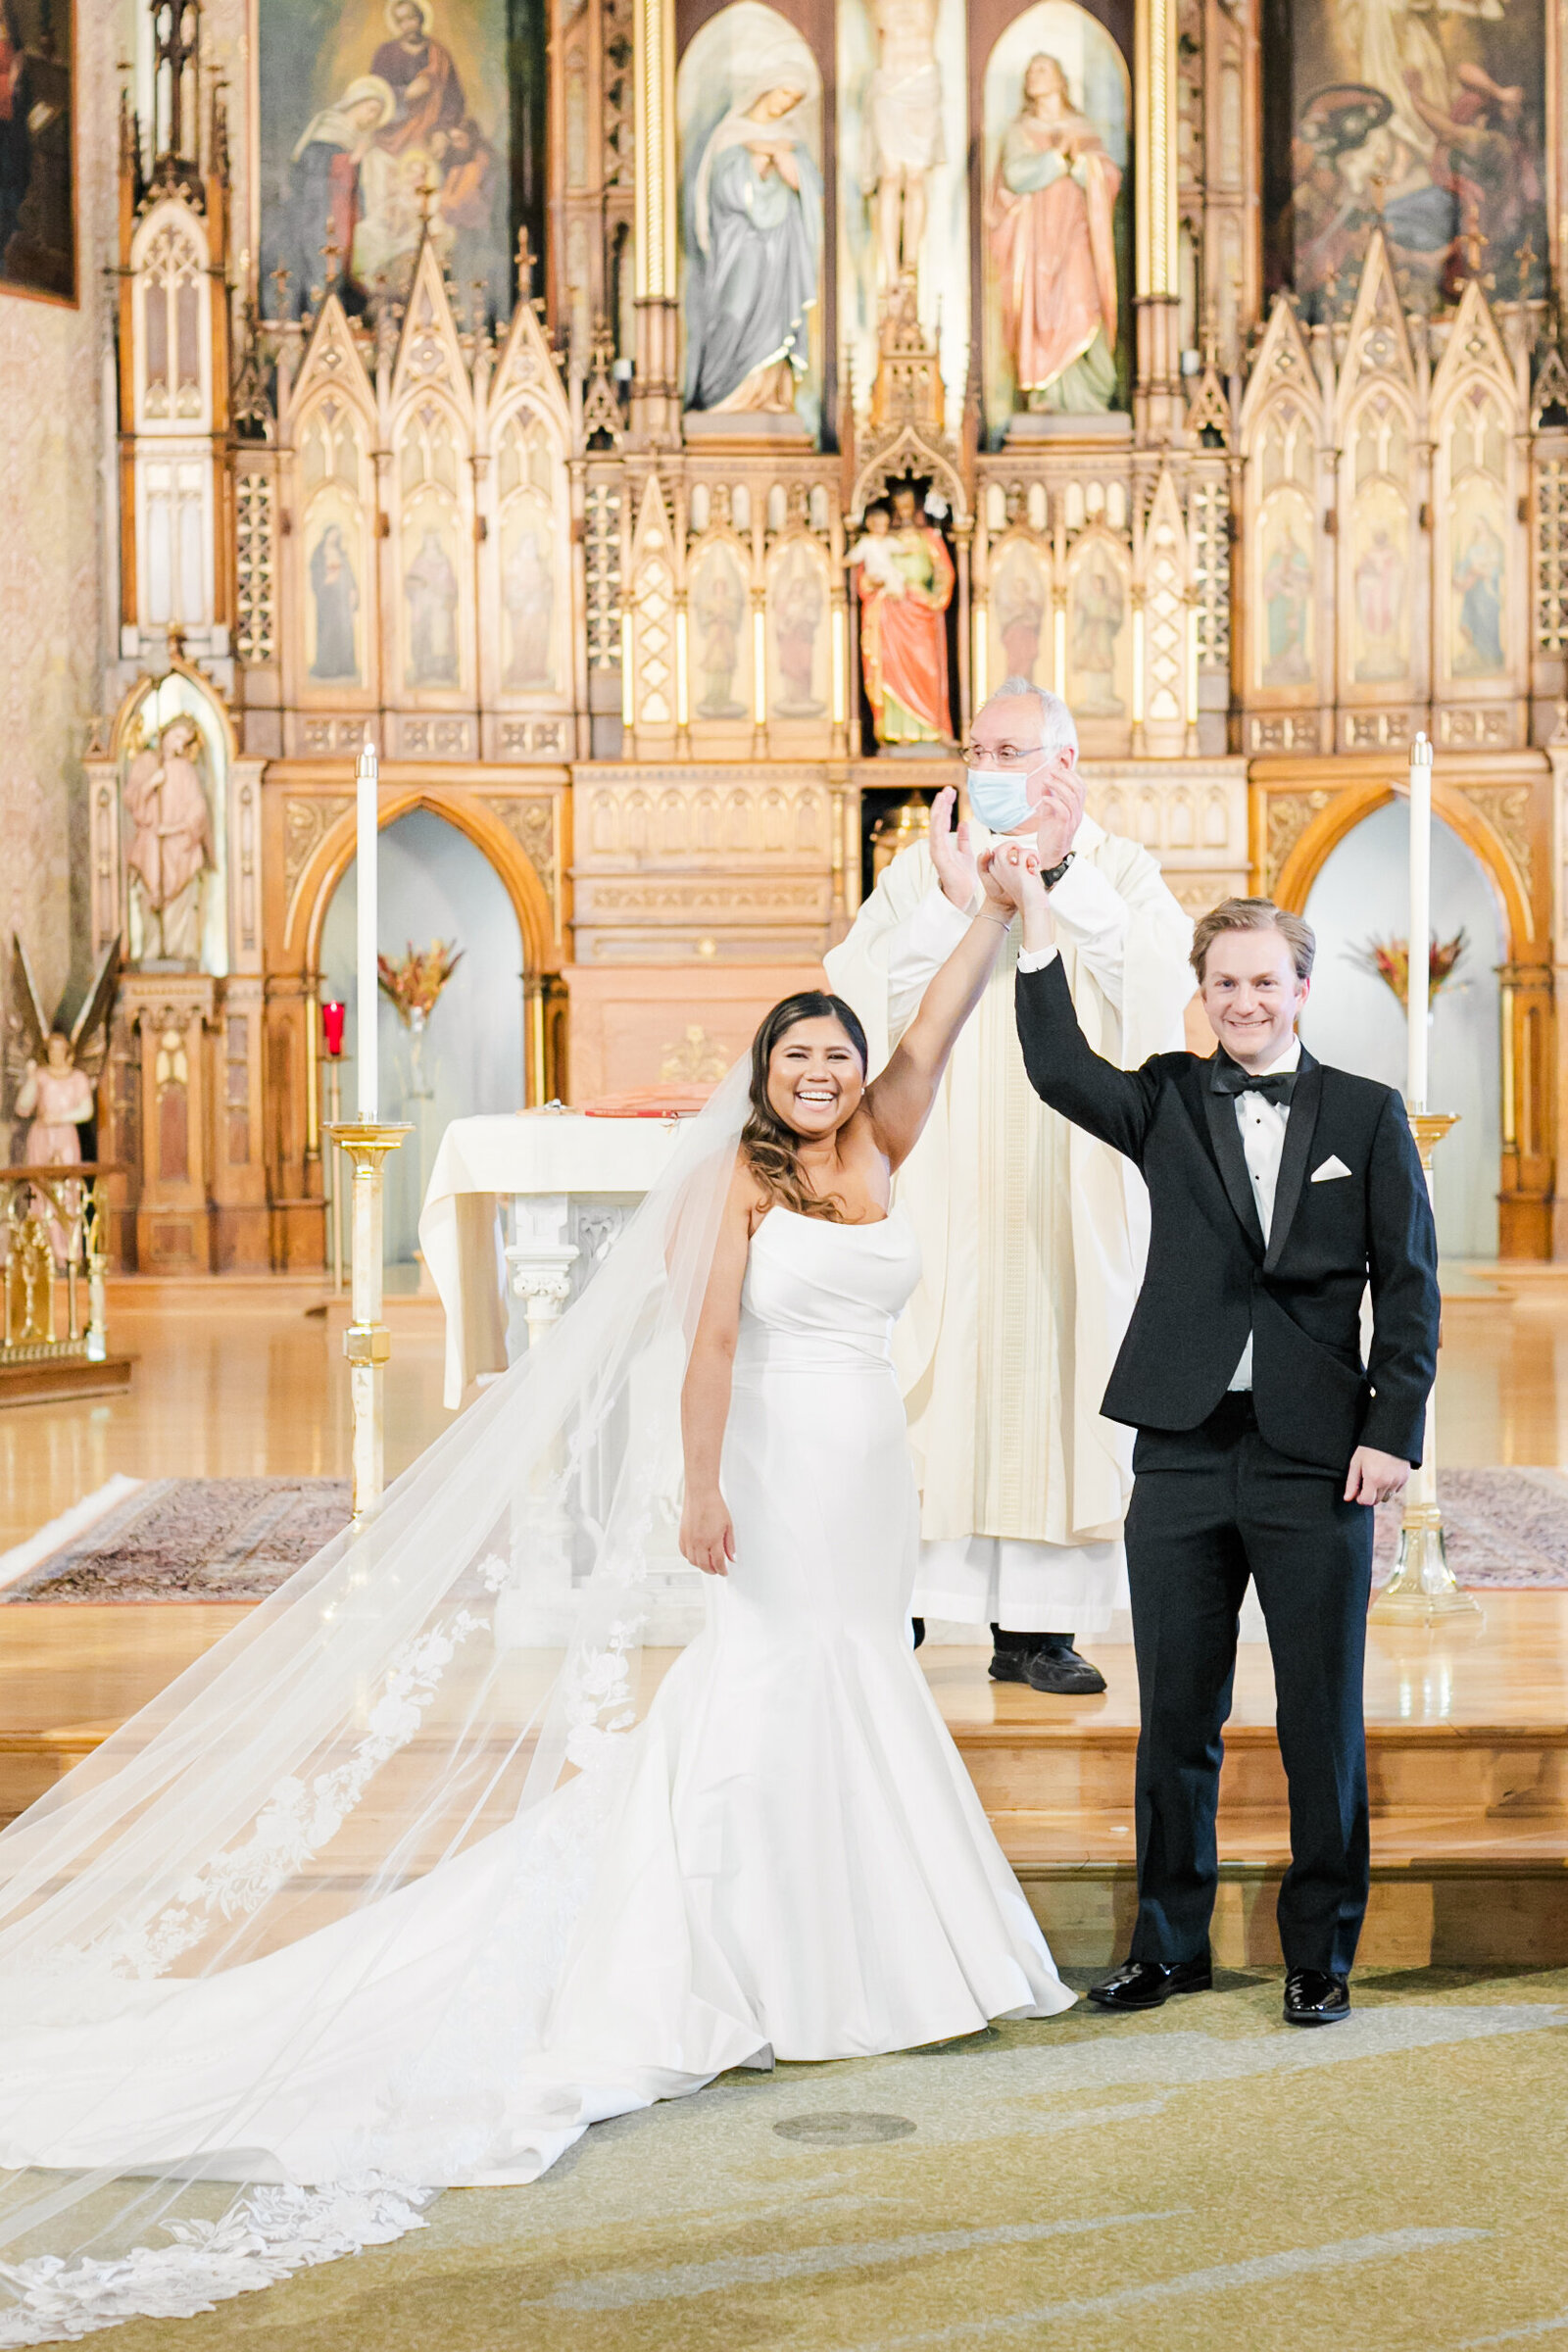 27_bride_and_groom_after_ceremony_at_alter_in_Catholic_church_chicago_illinois